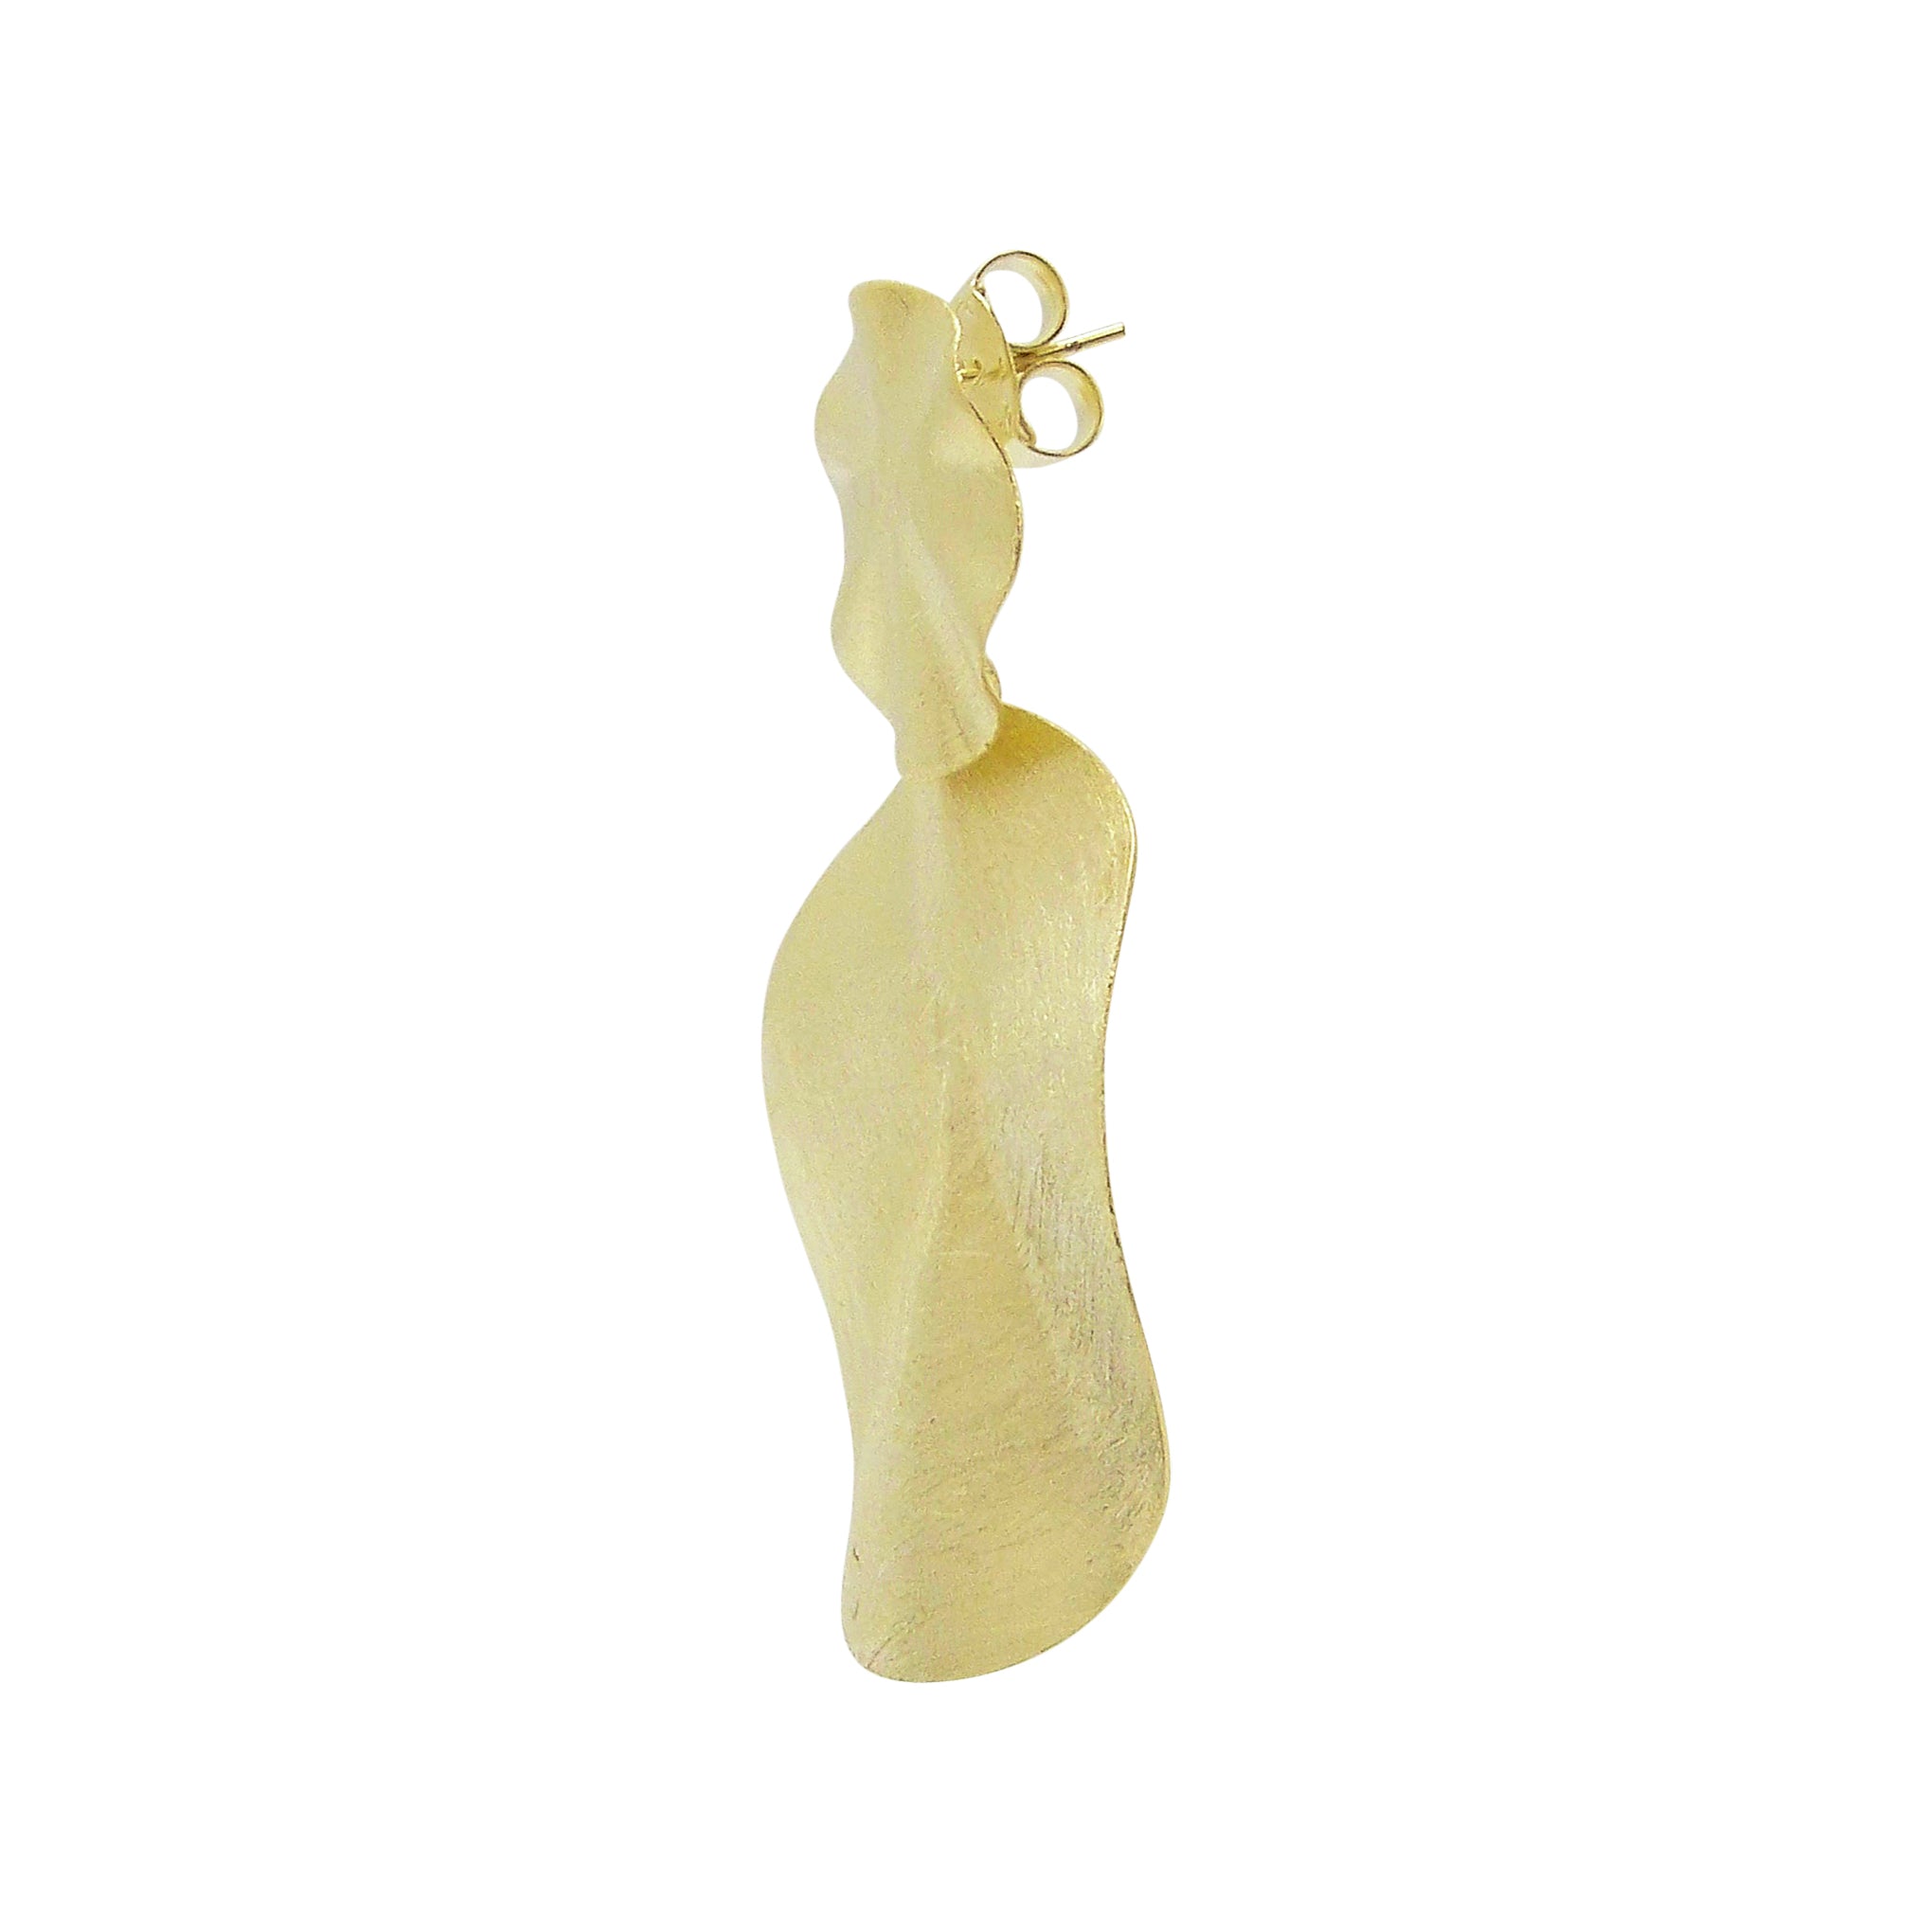 45 Degree Angle View of Sheila Fajl Isola Double Dangle Organic Earrings in Brushed Gold